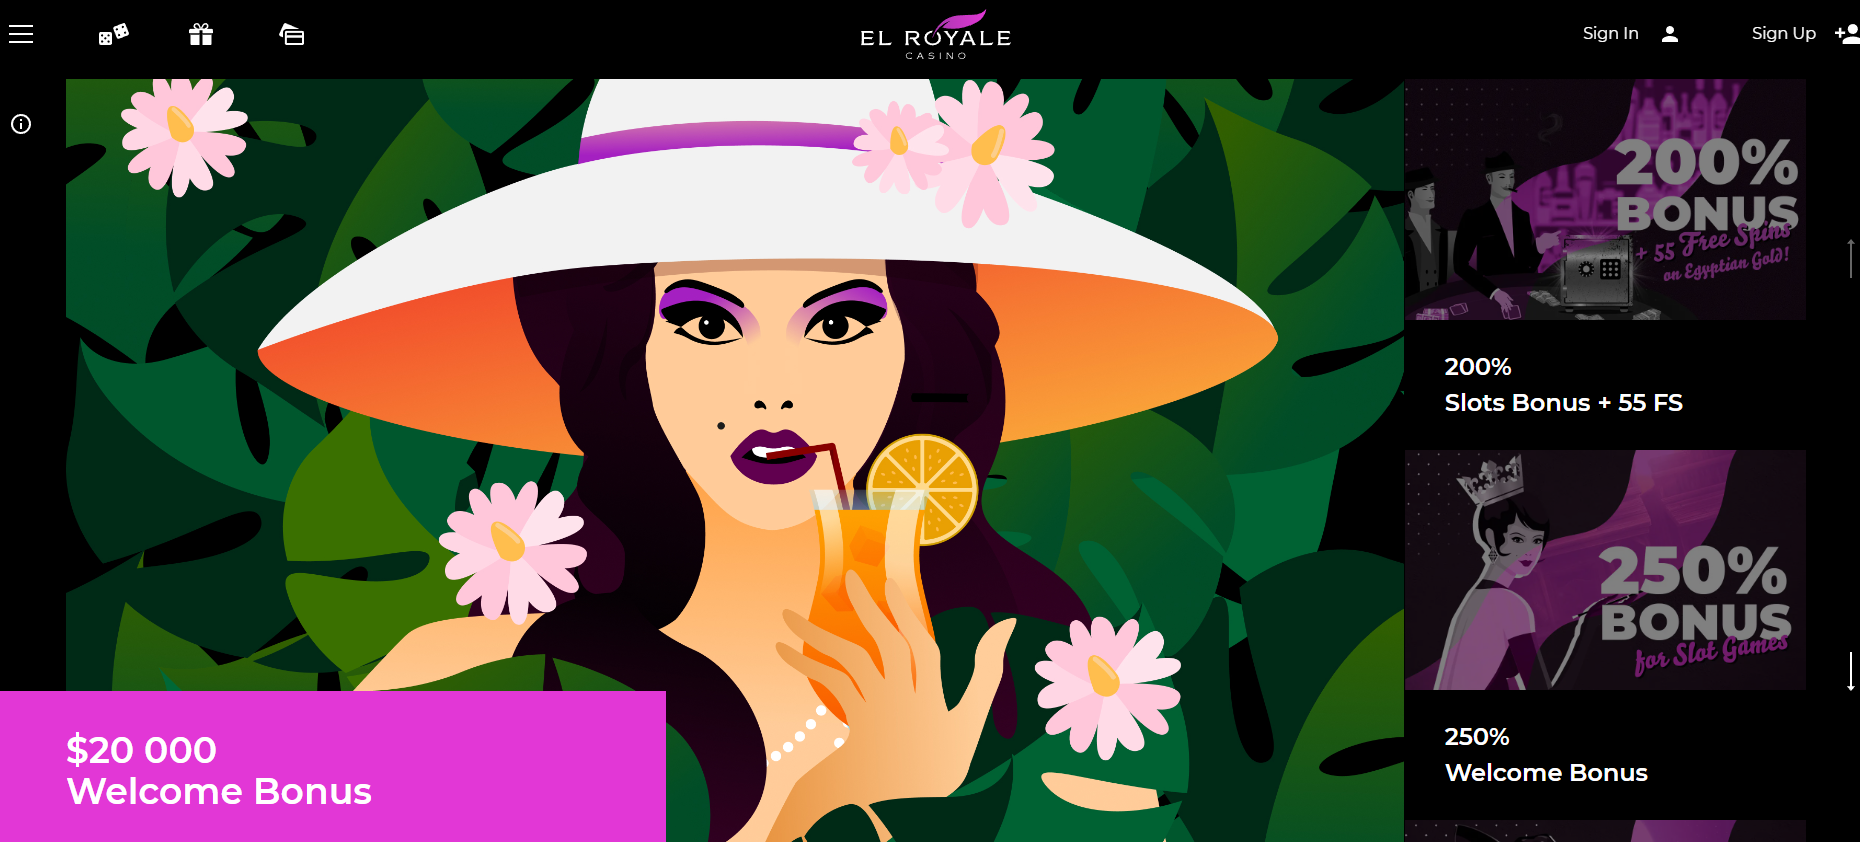 lady with purple eyeshadow and white hat sips juice | Online Casinos with No Deposit Bonus Codes 2022